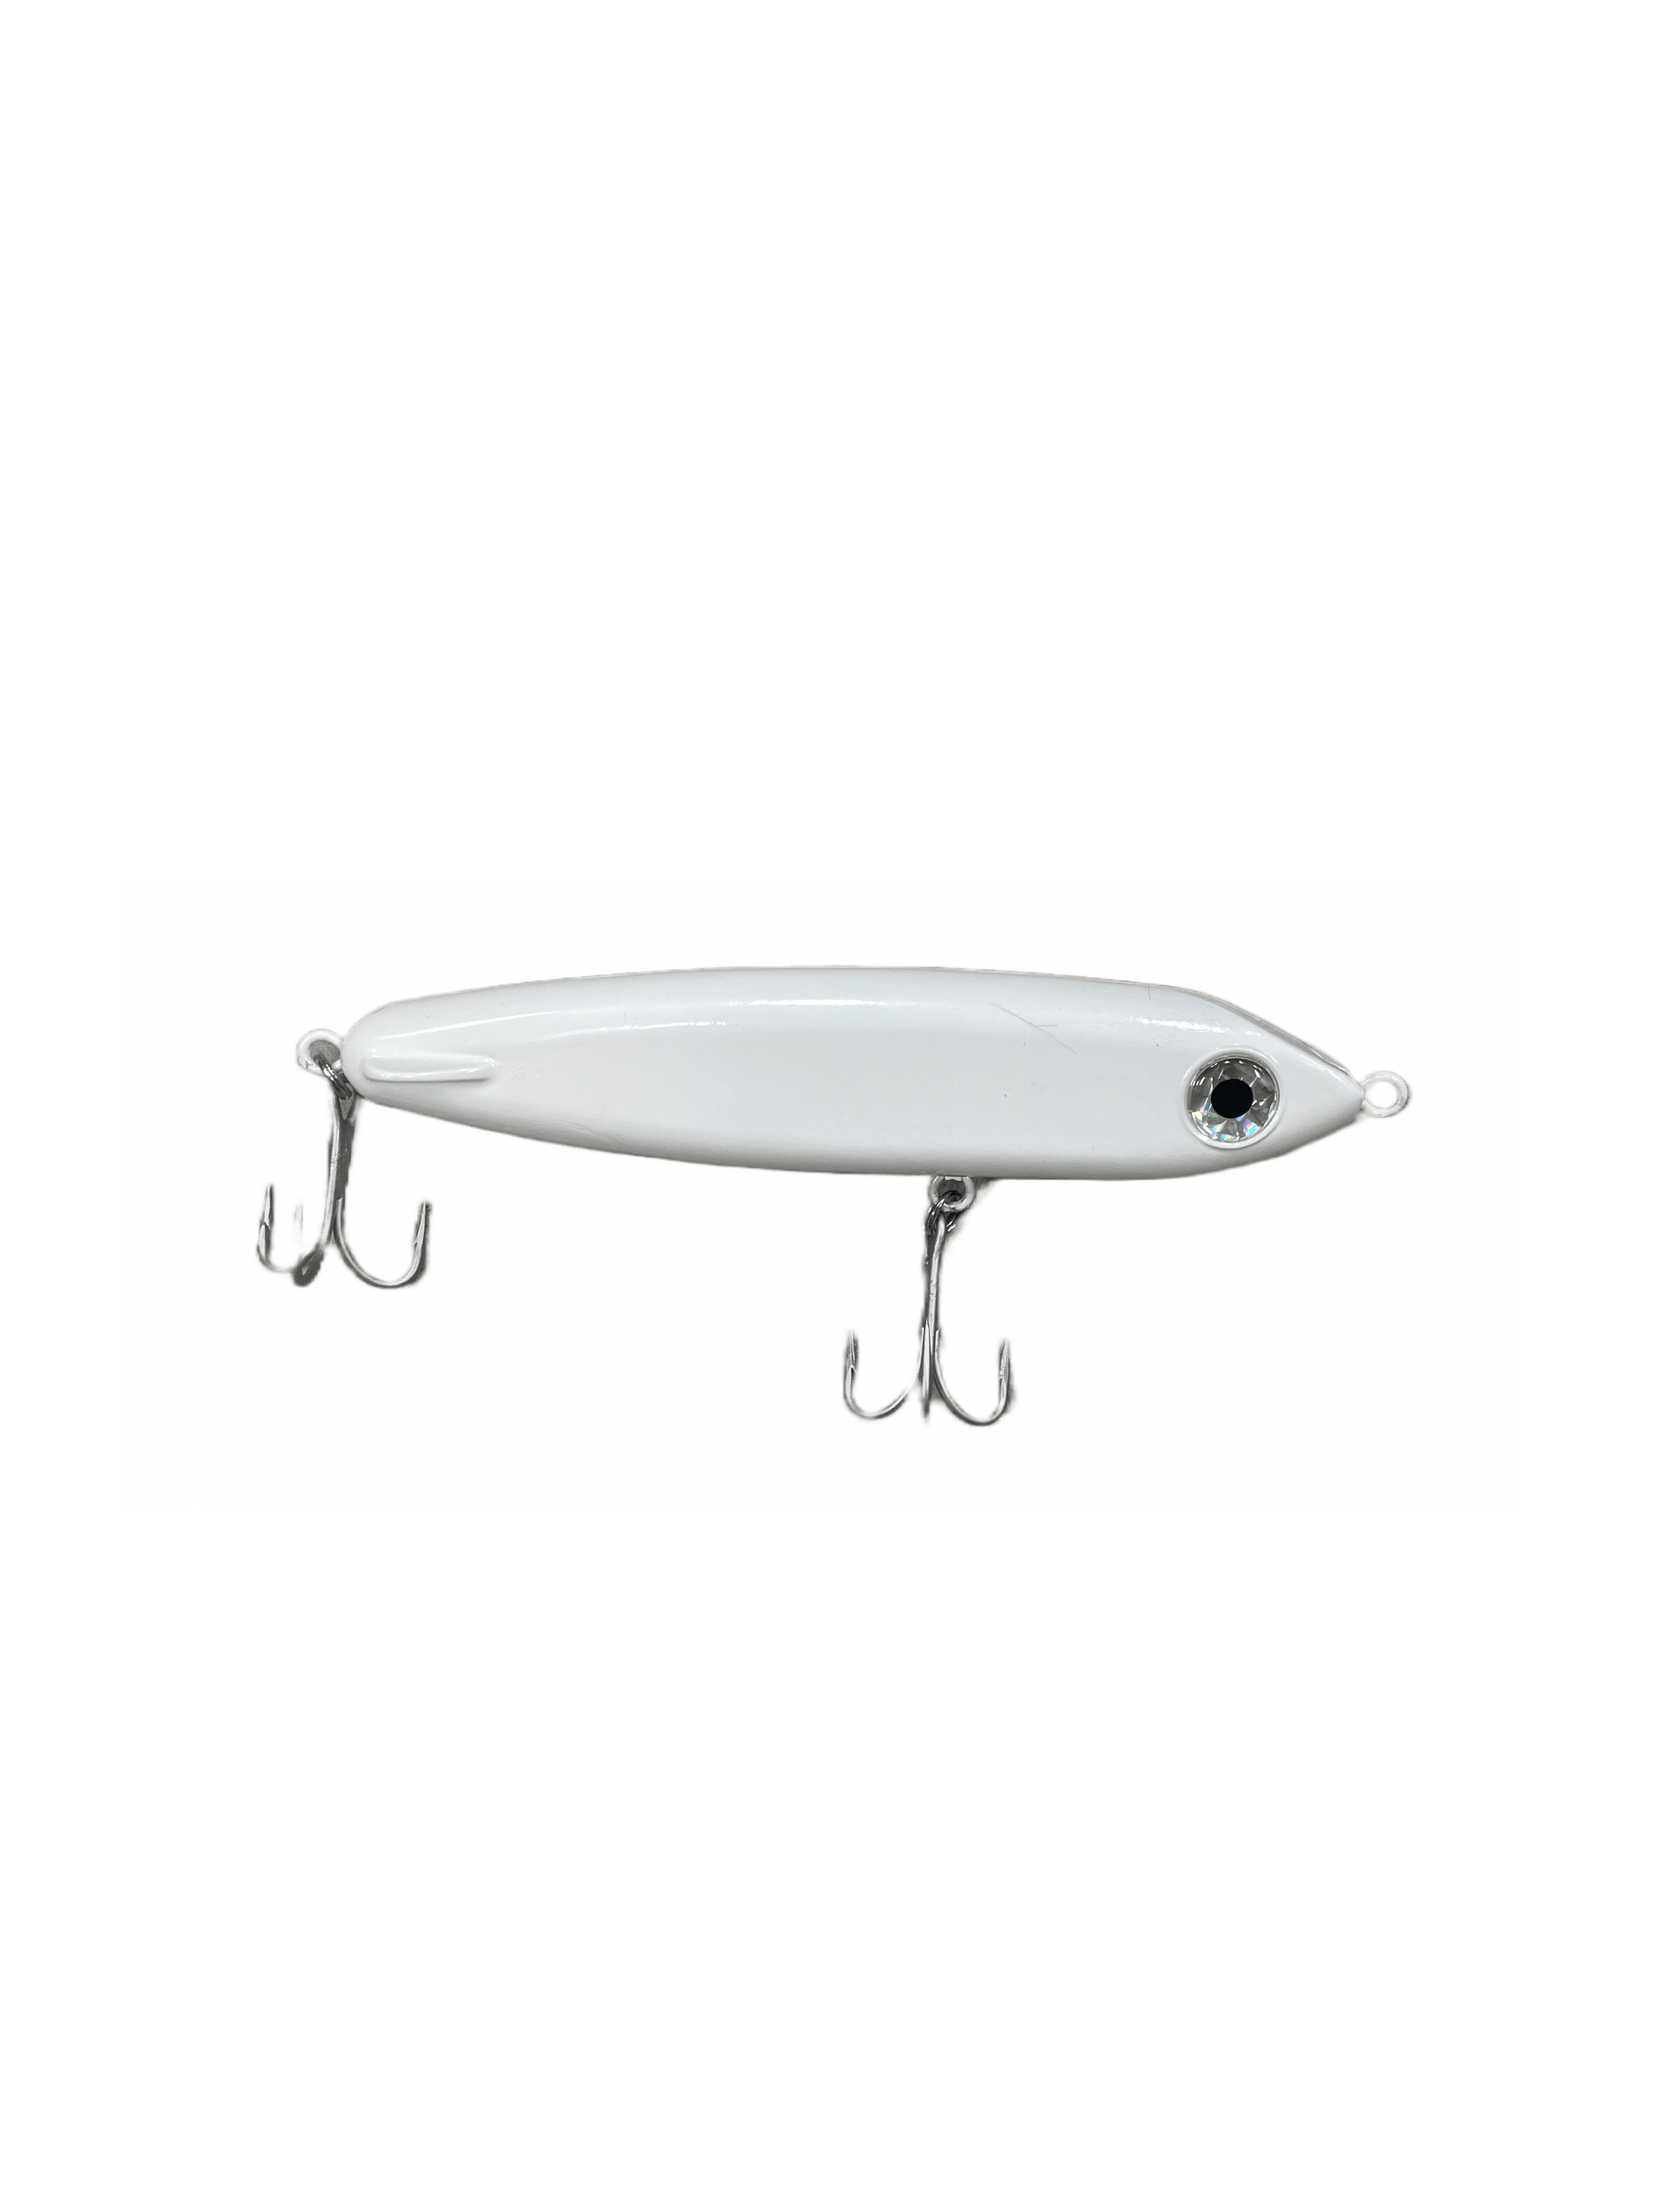 All Tagged plastic-glide-baits - The Saltwater Edge